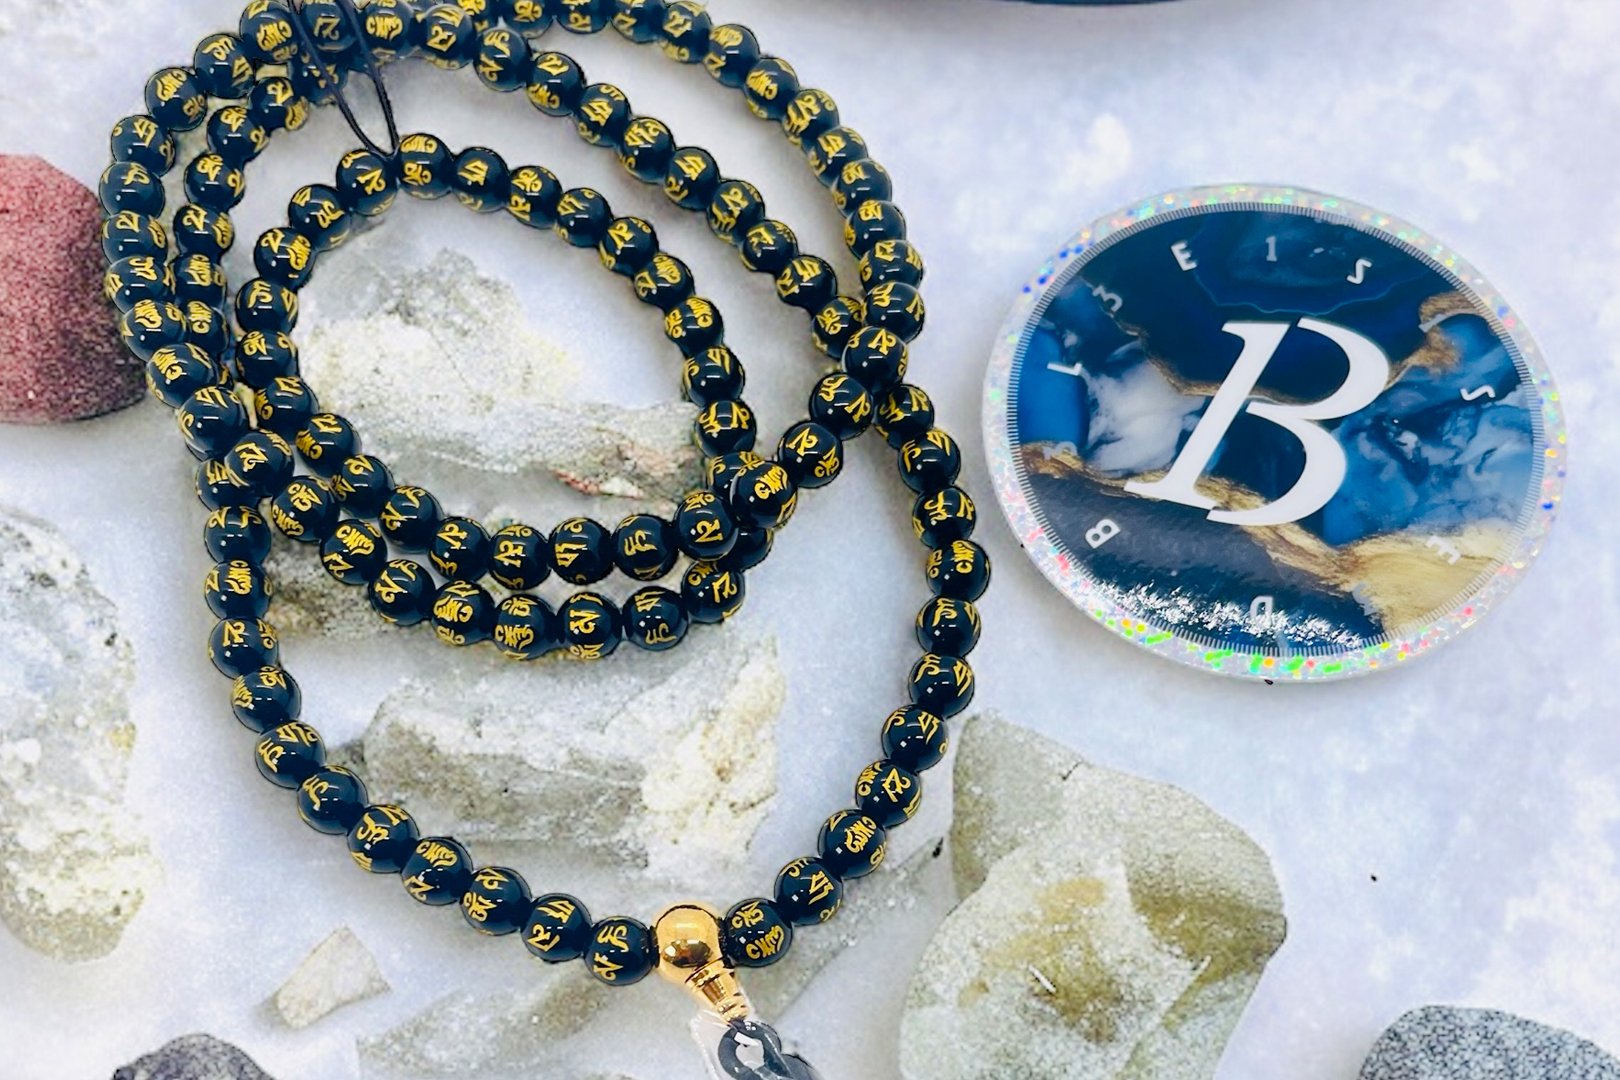 🌟 Did you know we have collaborated with Blessed331133 for over a year, a renowned name in sacred crystal bracelets and malas. Joining forces, we're crafting a collection that harmonizes mind, body, and spirit. Expect nothing but the best in quality